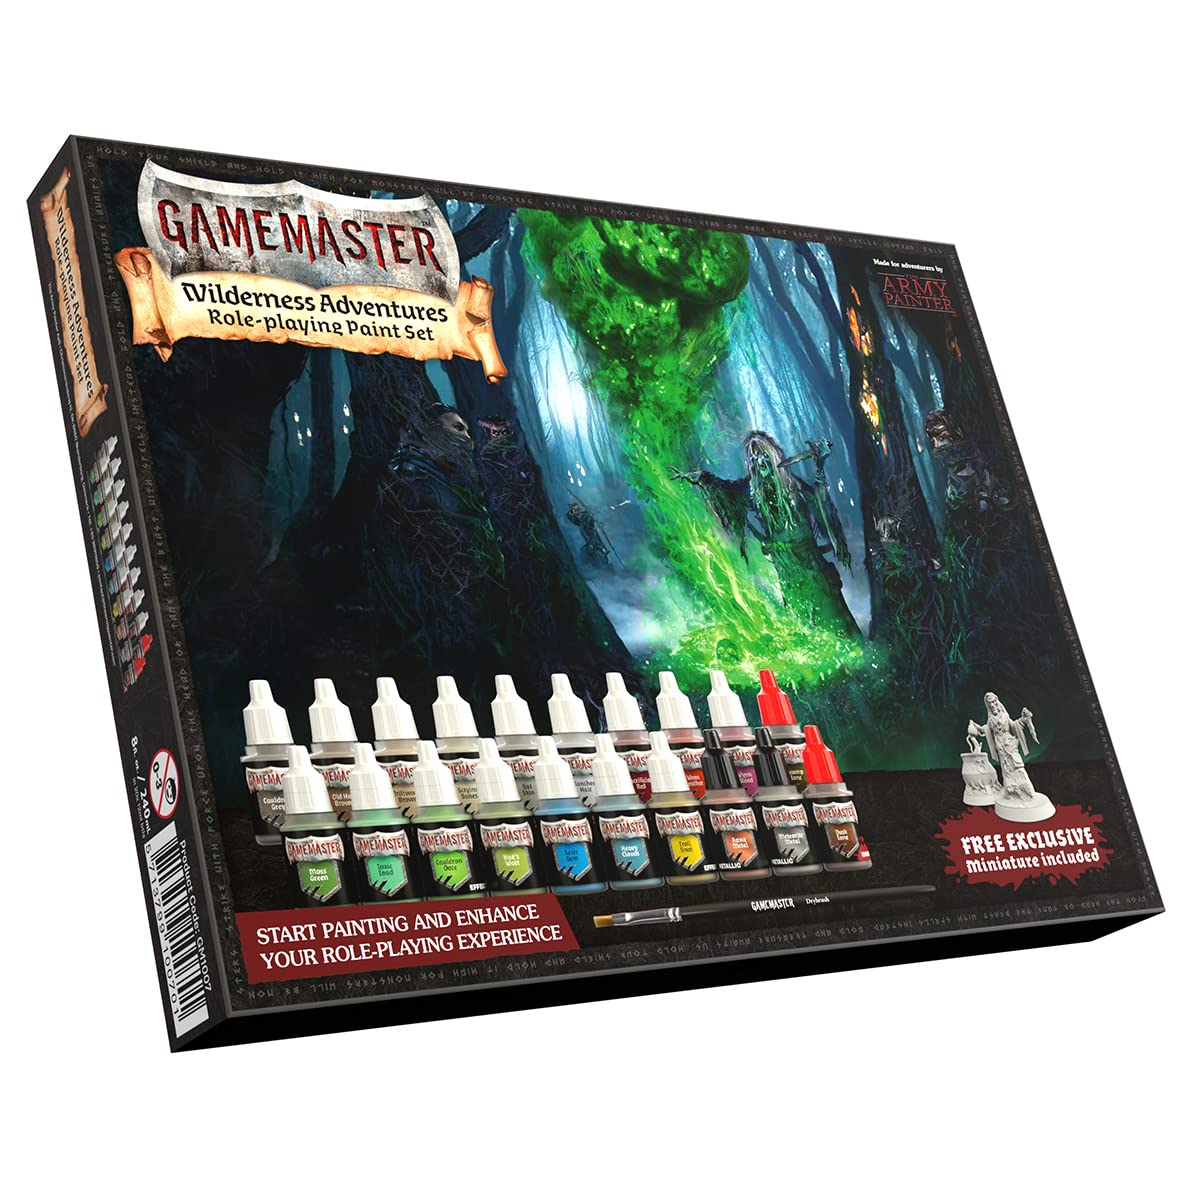 GameMaster Wilderness Adventures Role-playing Paint Set | I Want That Stuff Brandon